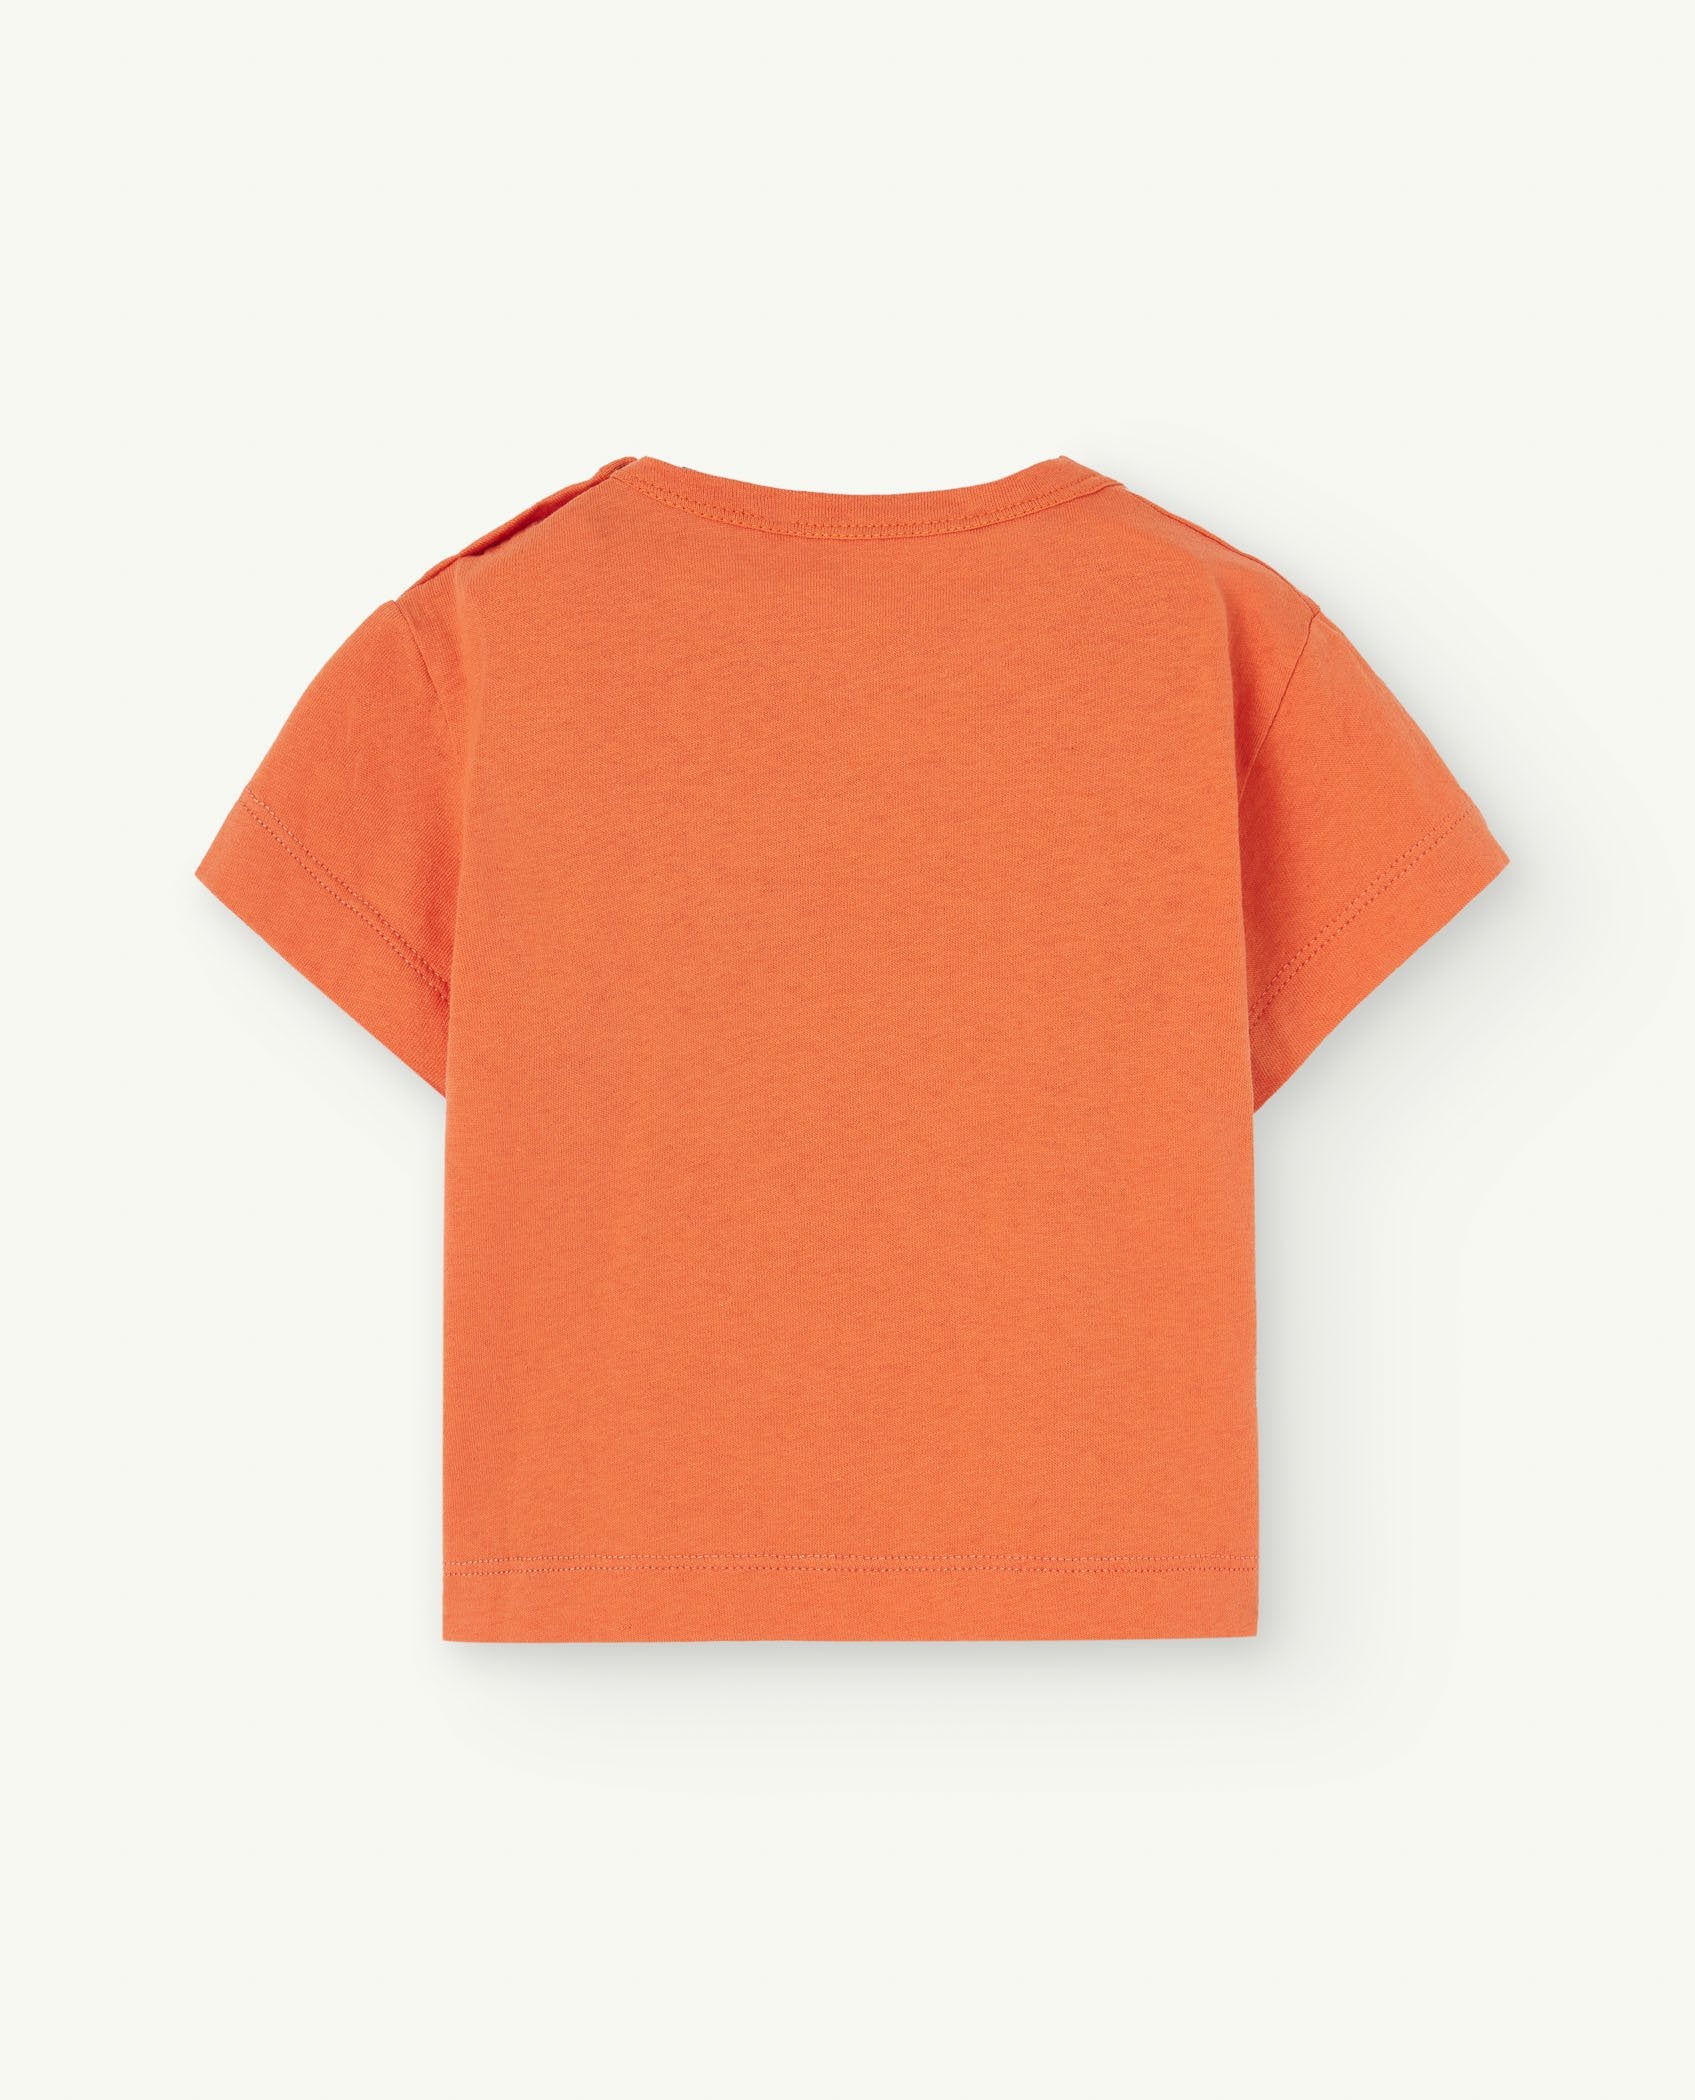 Orange Rooster Baby T-Shirt PRODUCT BACK